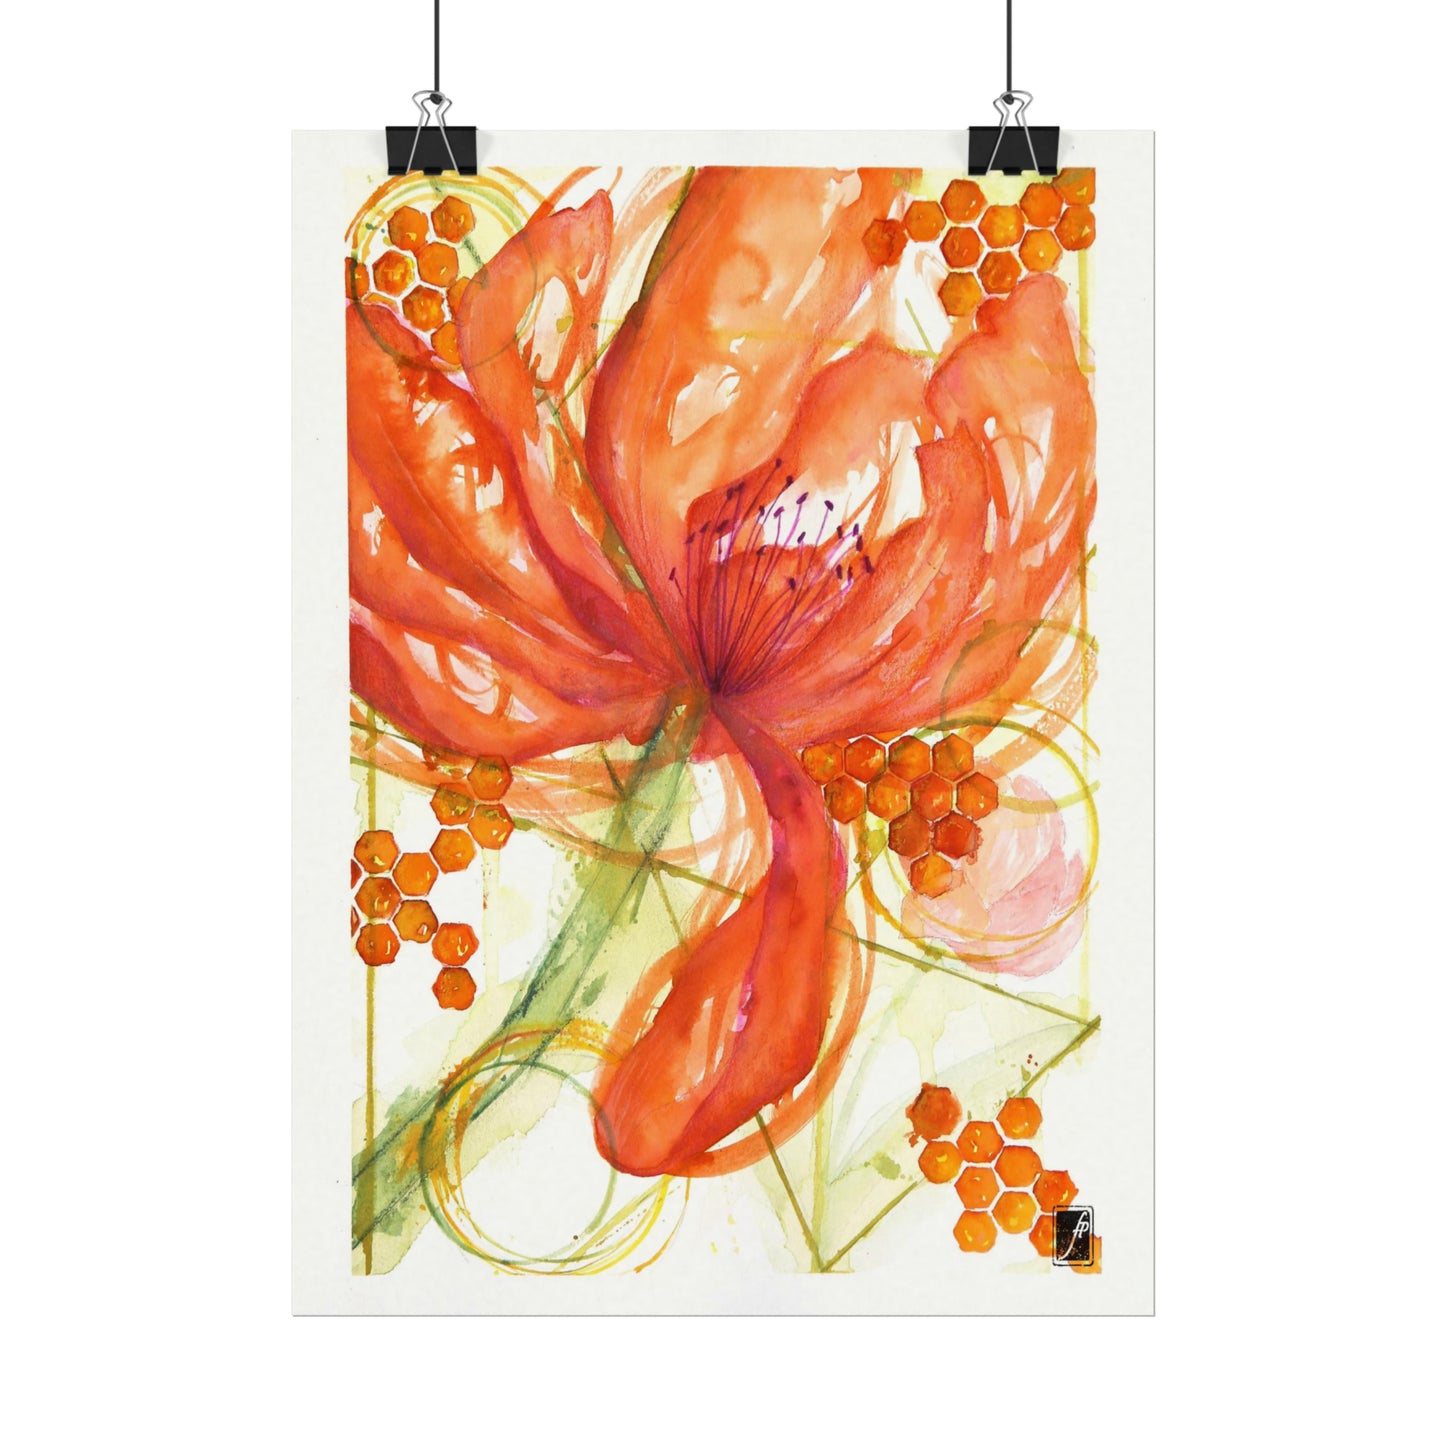 Whimsy Watercolor Print